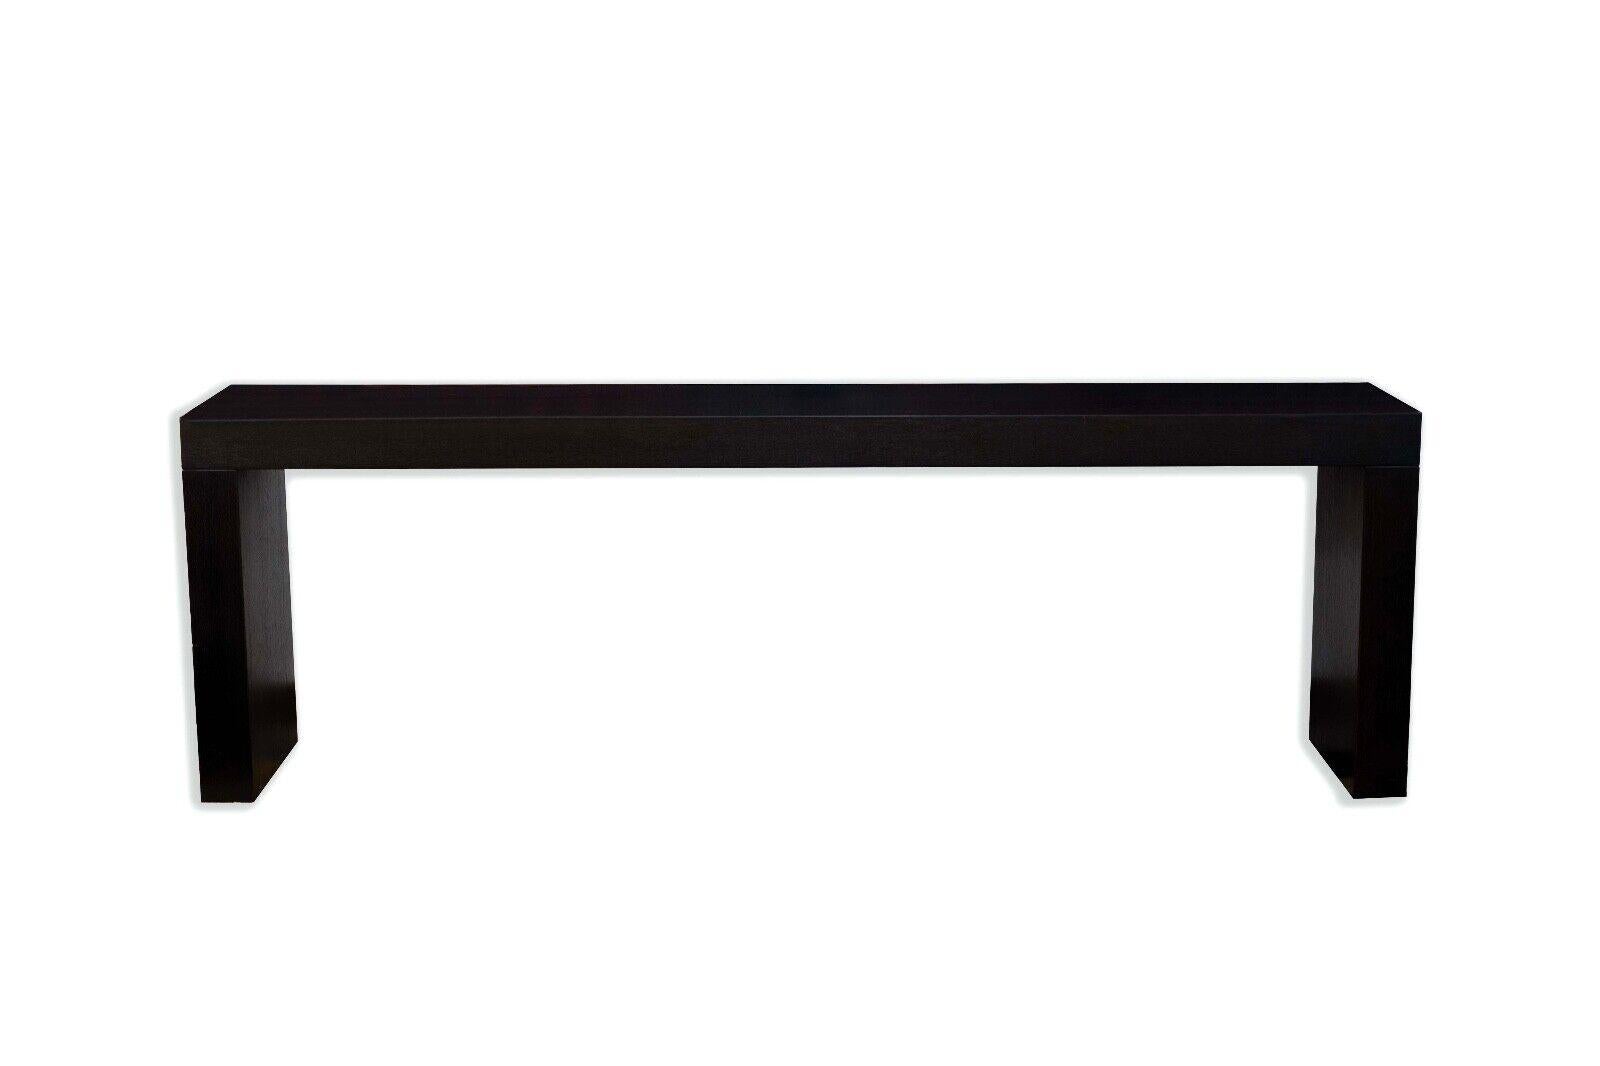 This is a contemporary modern console table, characterized by its long, dark, rectangular shape and clean, sharp lines. Crafted from wood, the table's rich dark finish exudes elegance and modernity, making it a versatile addition to any space. Its